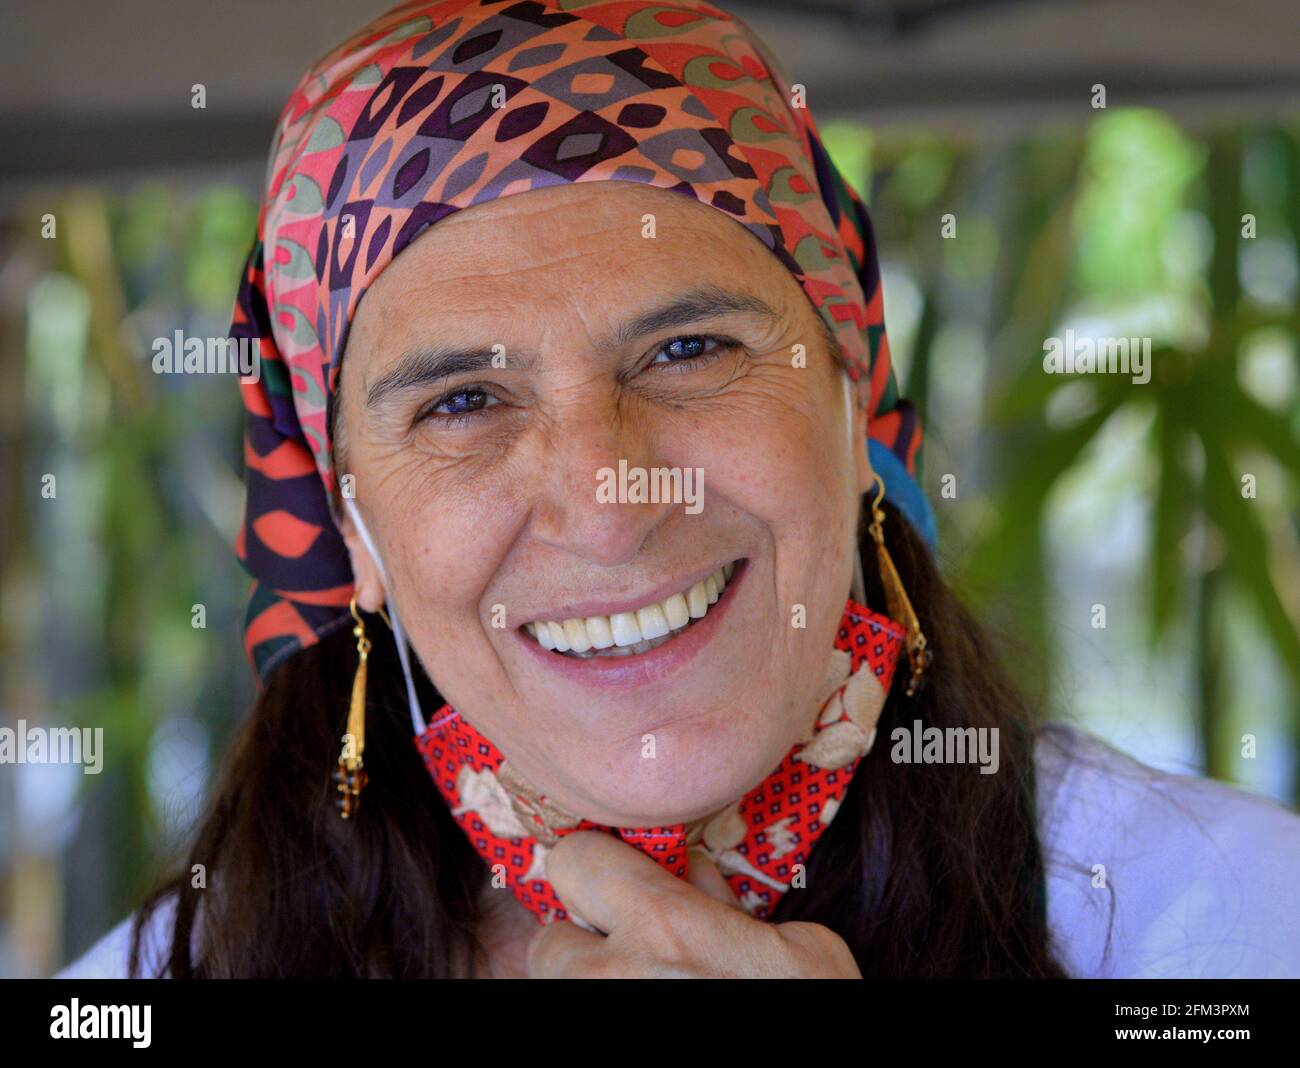 Mature positive Caucasian countrywoman (gardener) wears a modern head scarf and pulls down her red cloth face mask for a natural genuine teeth smile. Stock Photo